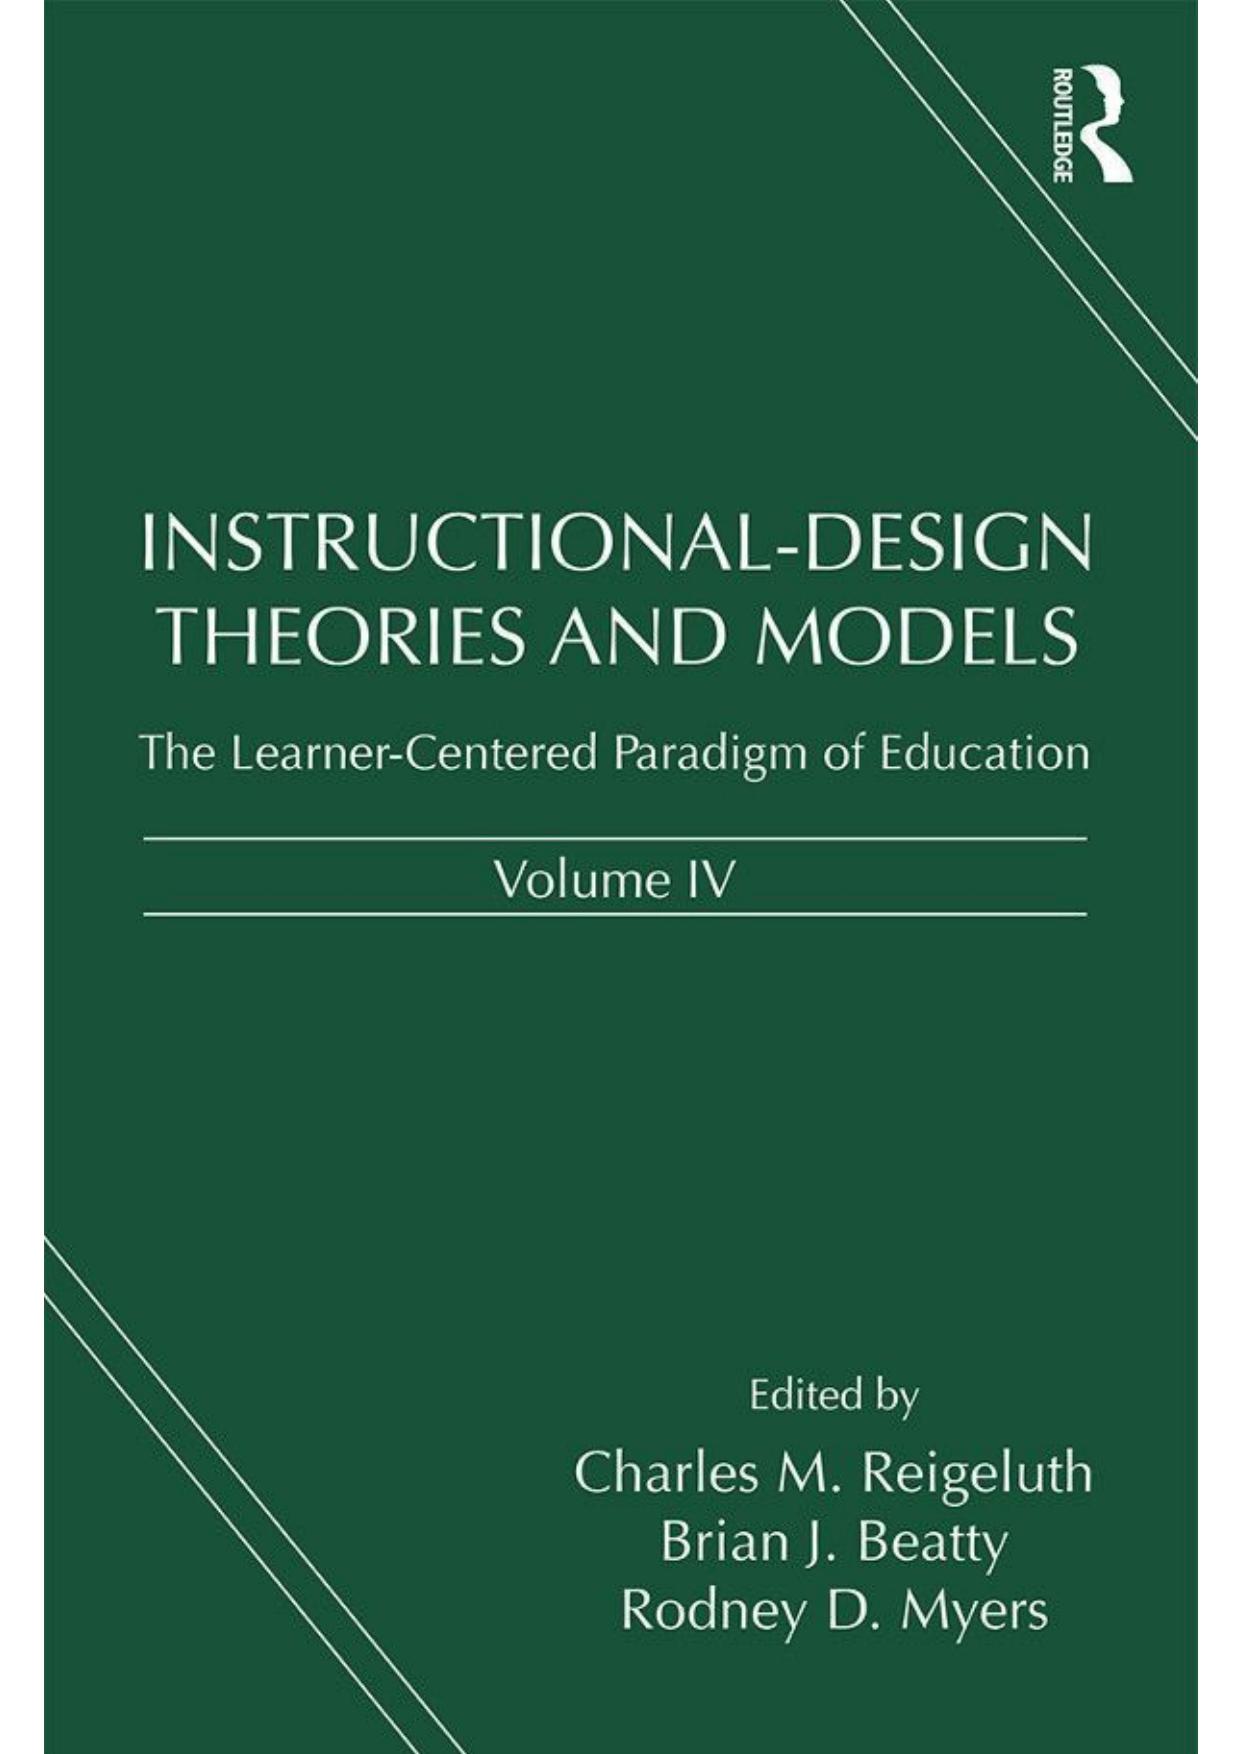 Instructional-Design Theories and Models, Volume IV: The Learner-Centered Paradigm of Education: 4